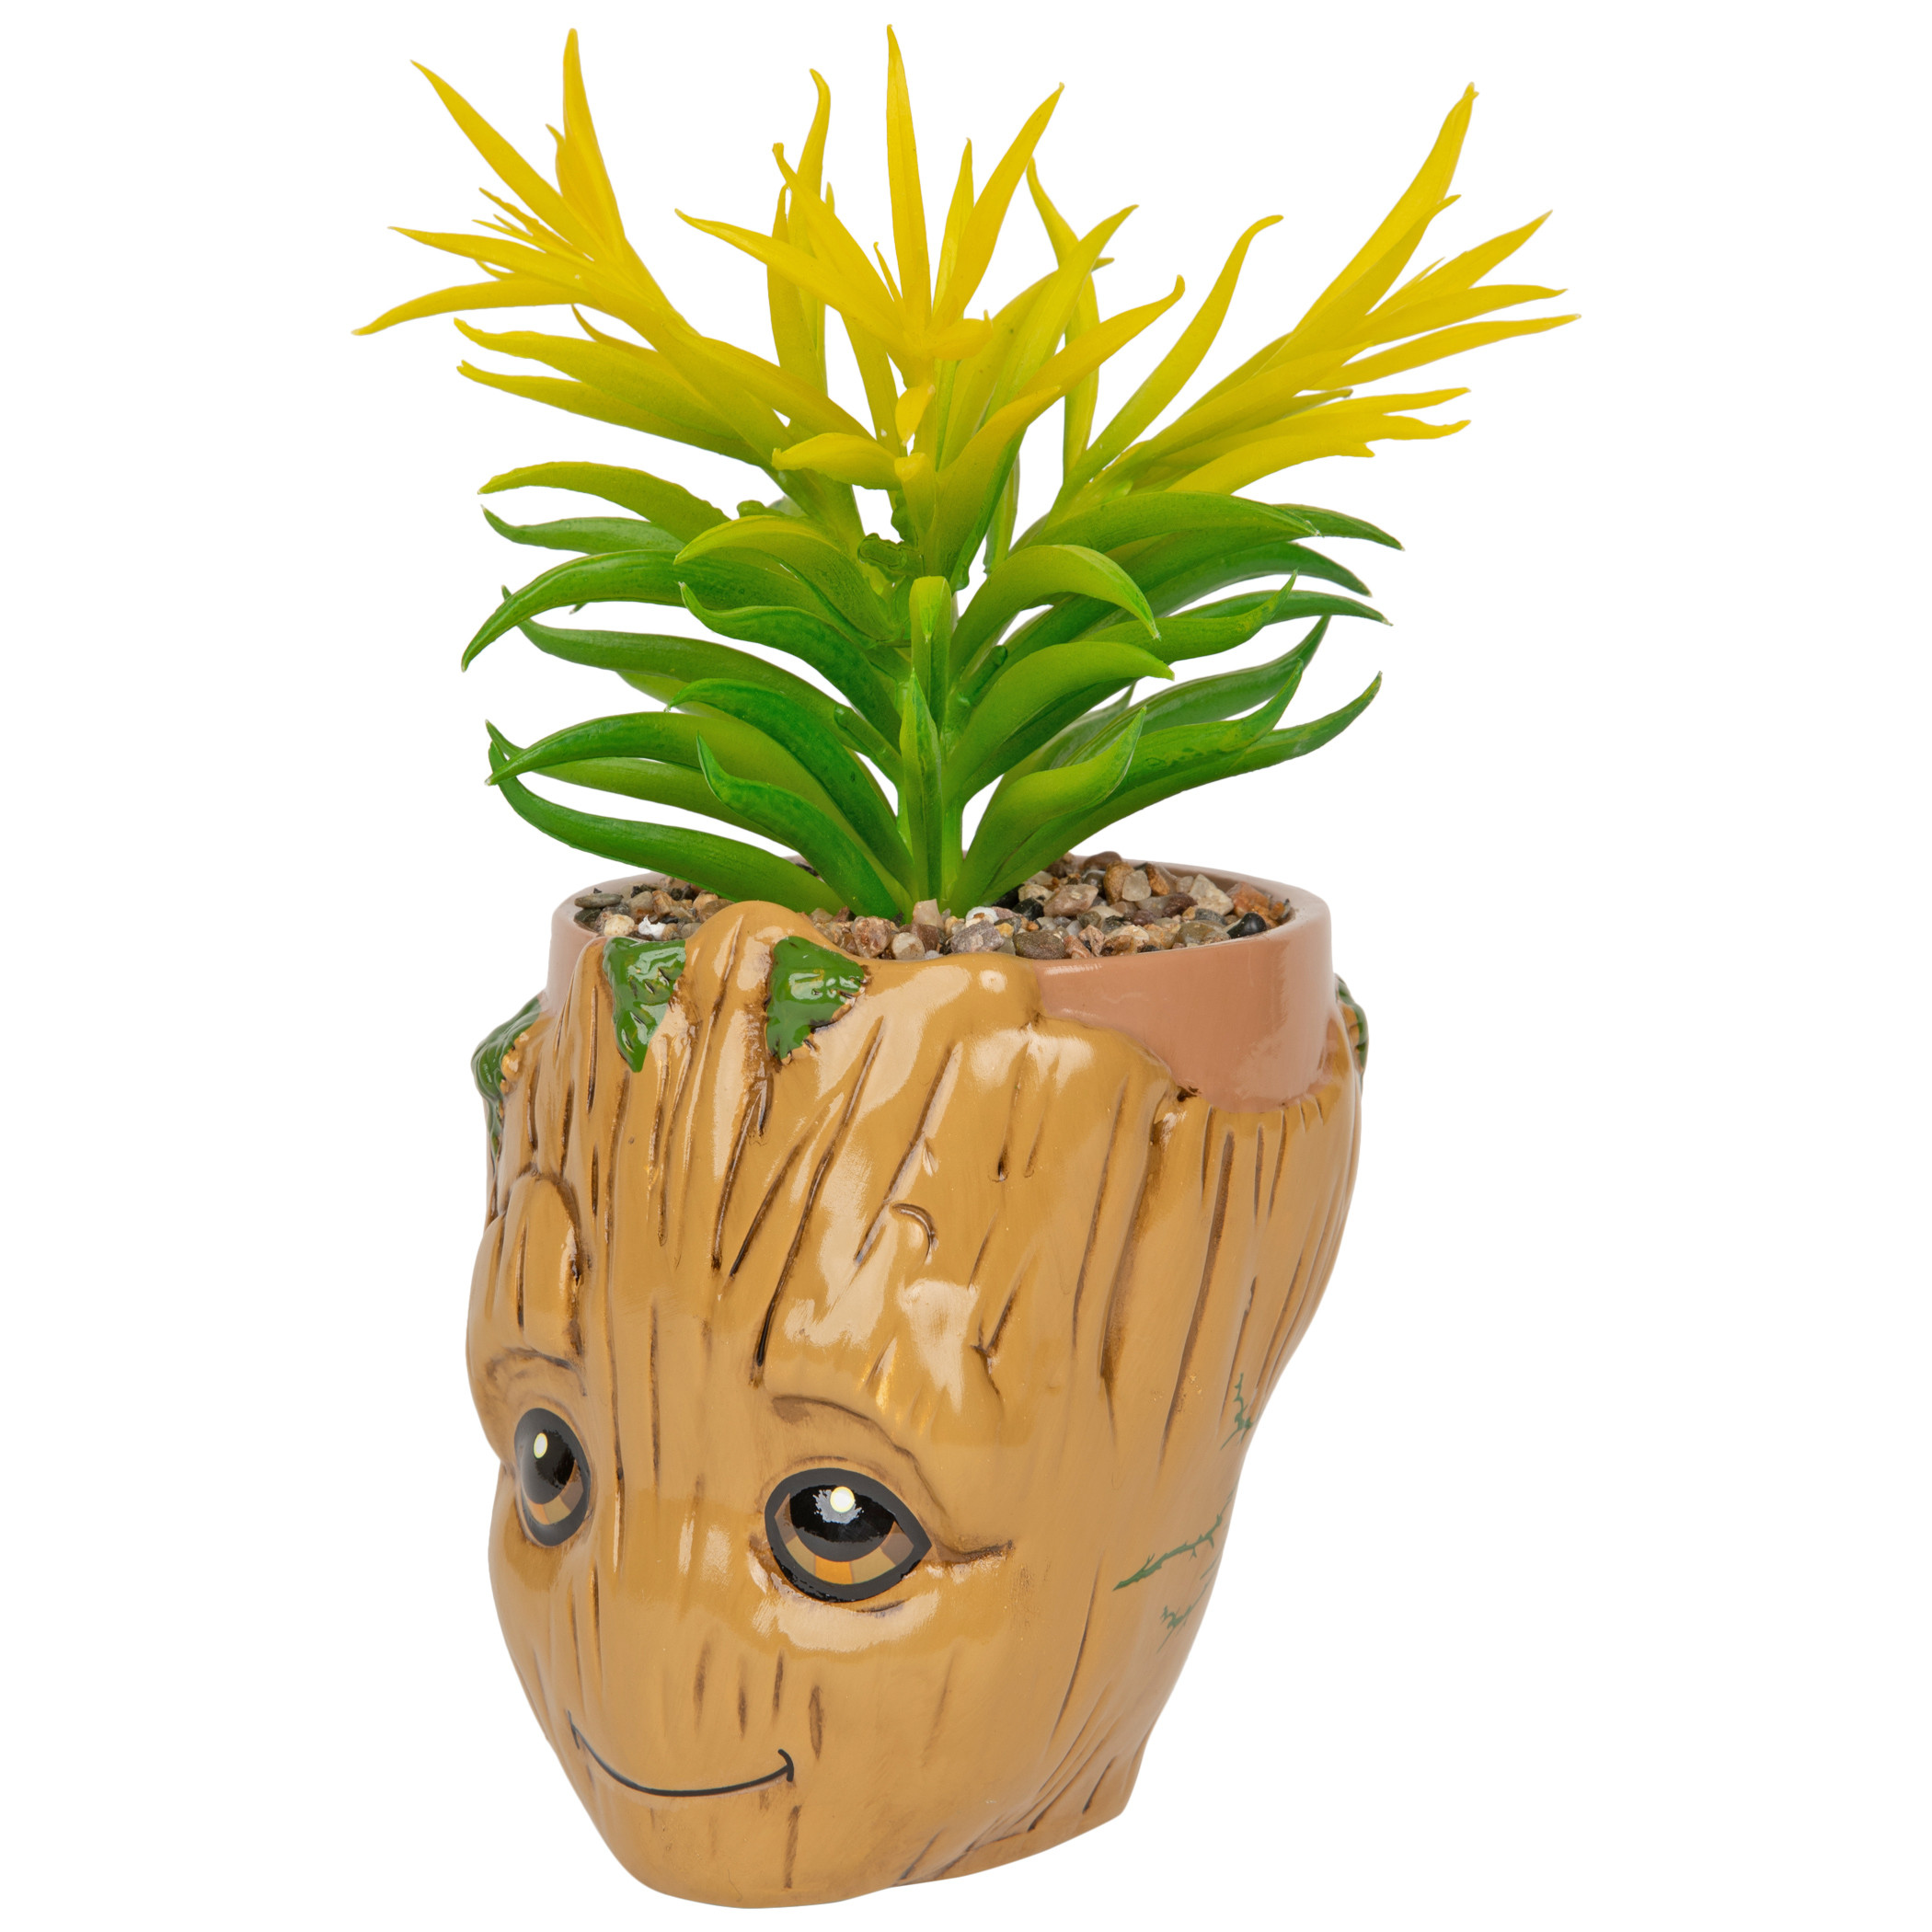 Guardians of the Galaxy Baby Groot Face 3D Ceramic Planter Pot